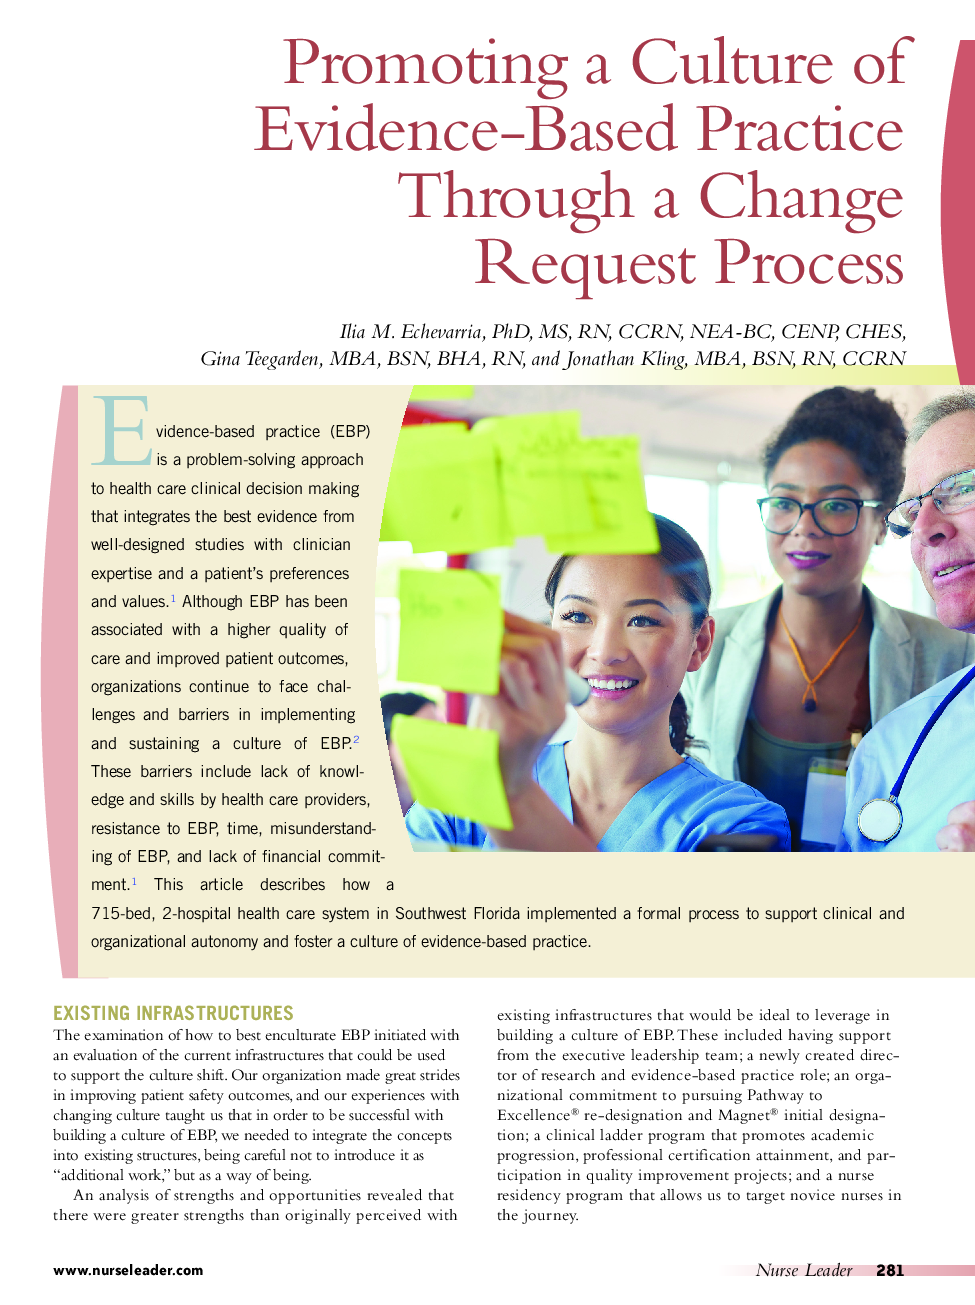 Promoting a Culture of Evidence-Based Practice Through a Change Request Process